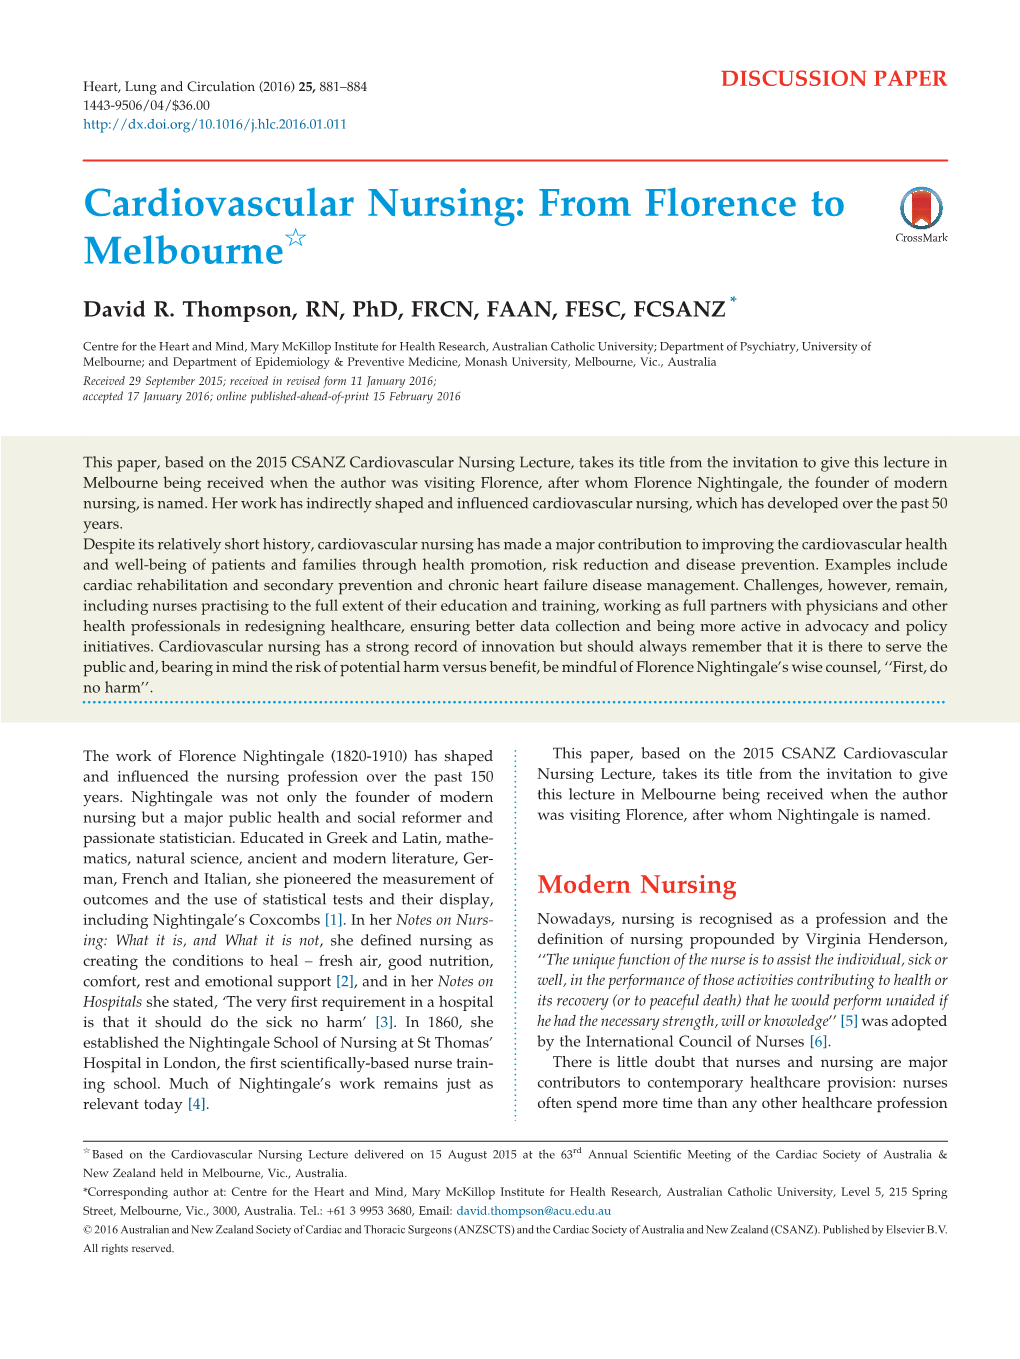 Cardiovascular Nursing: from Florence to Melbourne